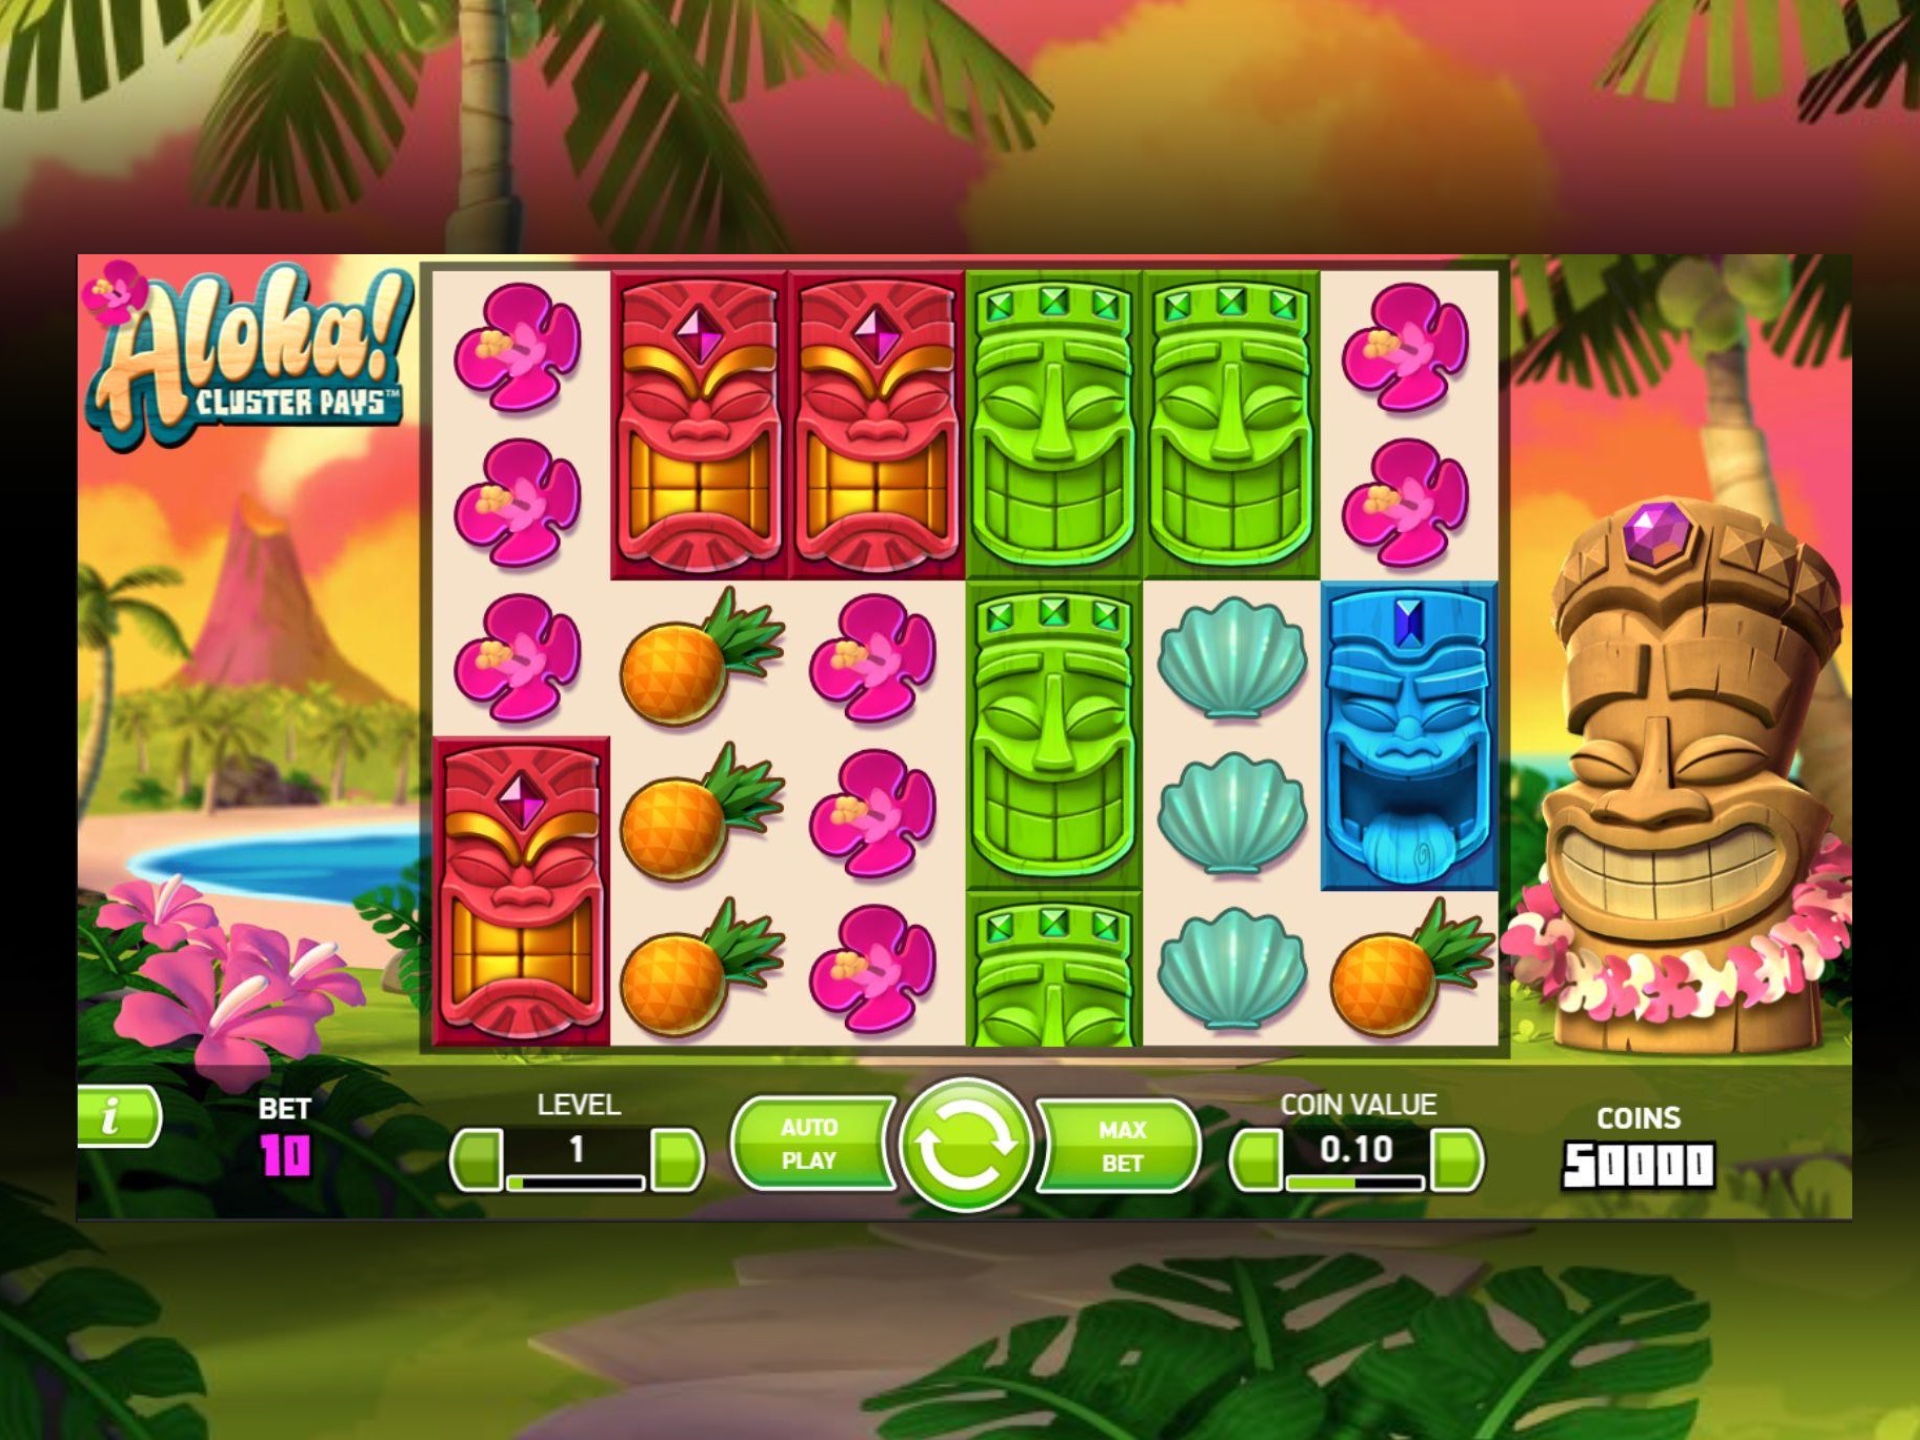 Sign up for an online casino and play this slot with ease.